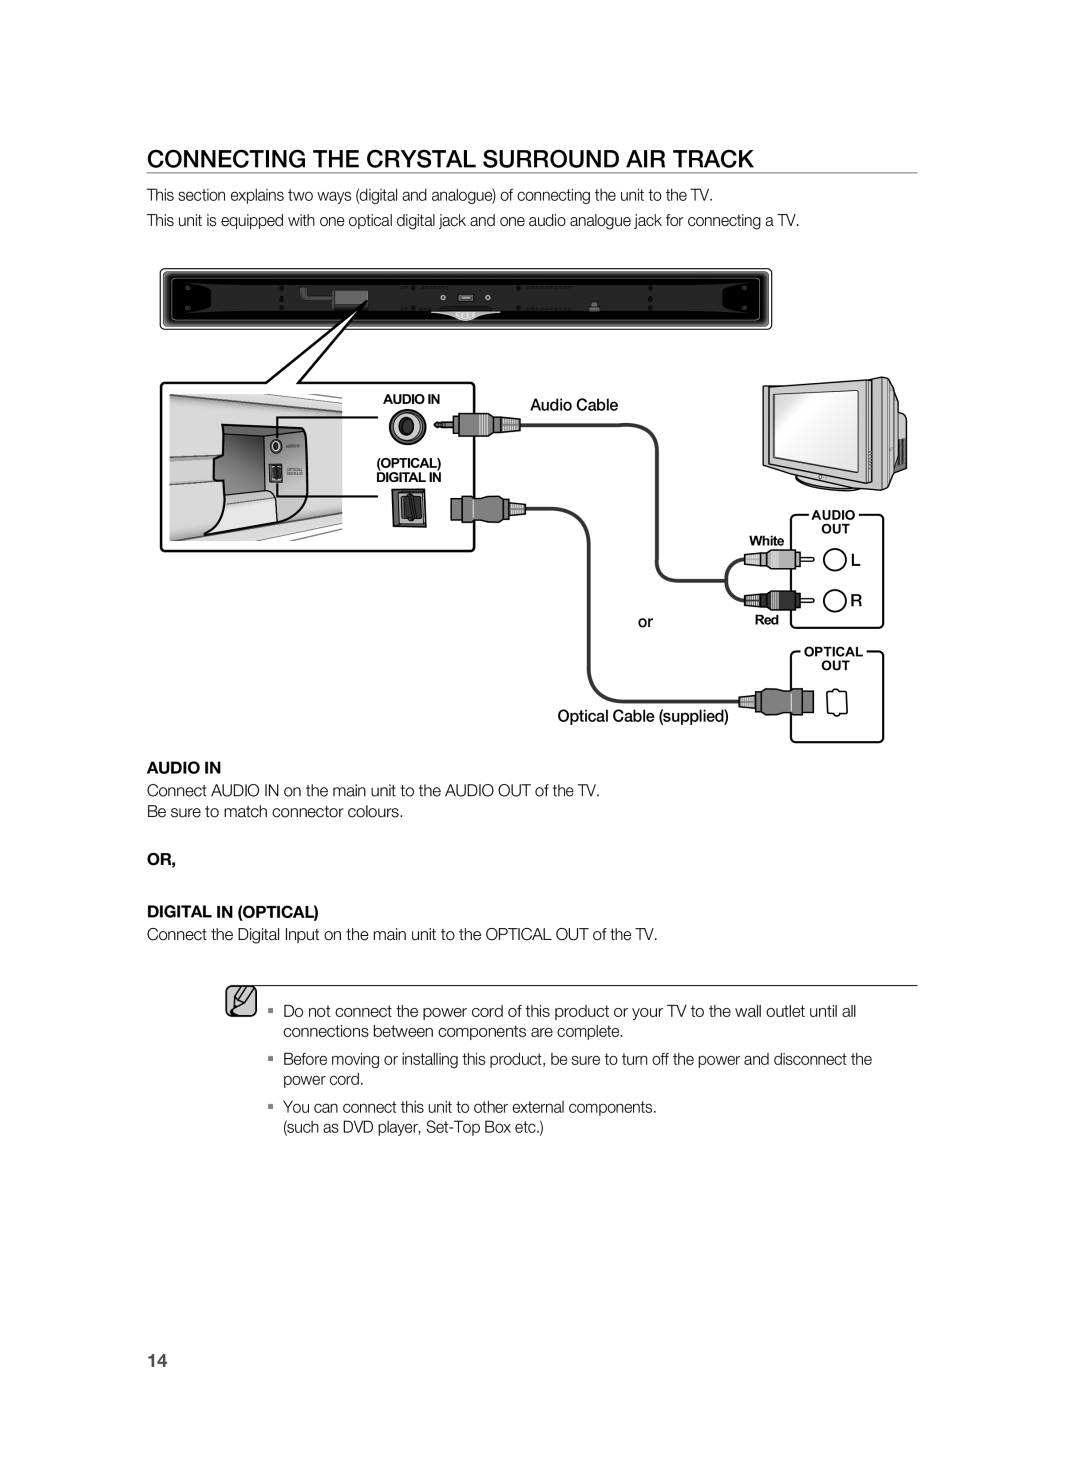 Samsung AH68-02184F user manual connecting the CRYSTAL SURROUND AIR TRACK, Audio In, Or Digital In Optical 